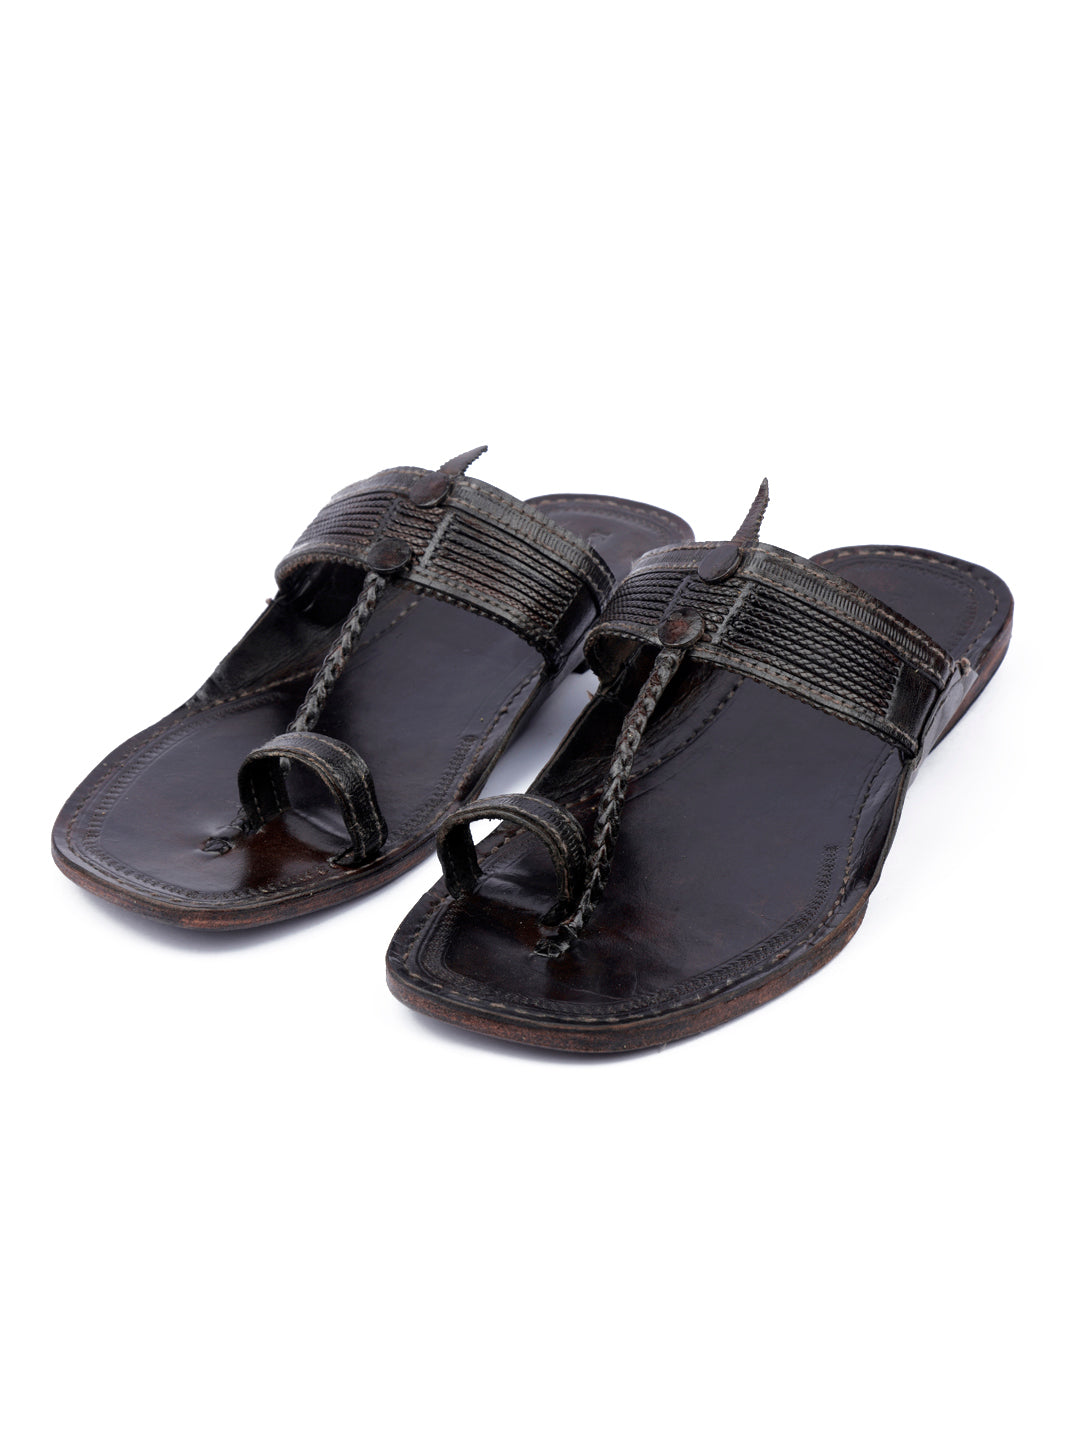 Comfertkart Unique Leather Kolhapuri Chappals for Men | Stylish And  Comfortable Darl Brown Handmade Leather Slipper, Kolhapuri's Chappal for  Mens (6) : Amazon.in: Shoes & Handbags